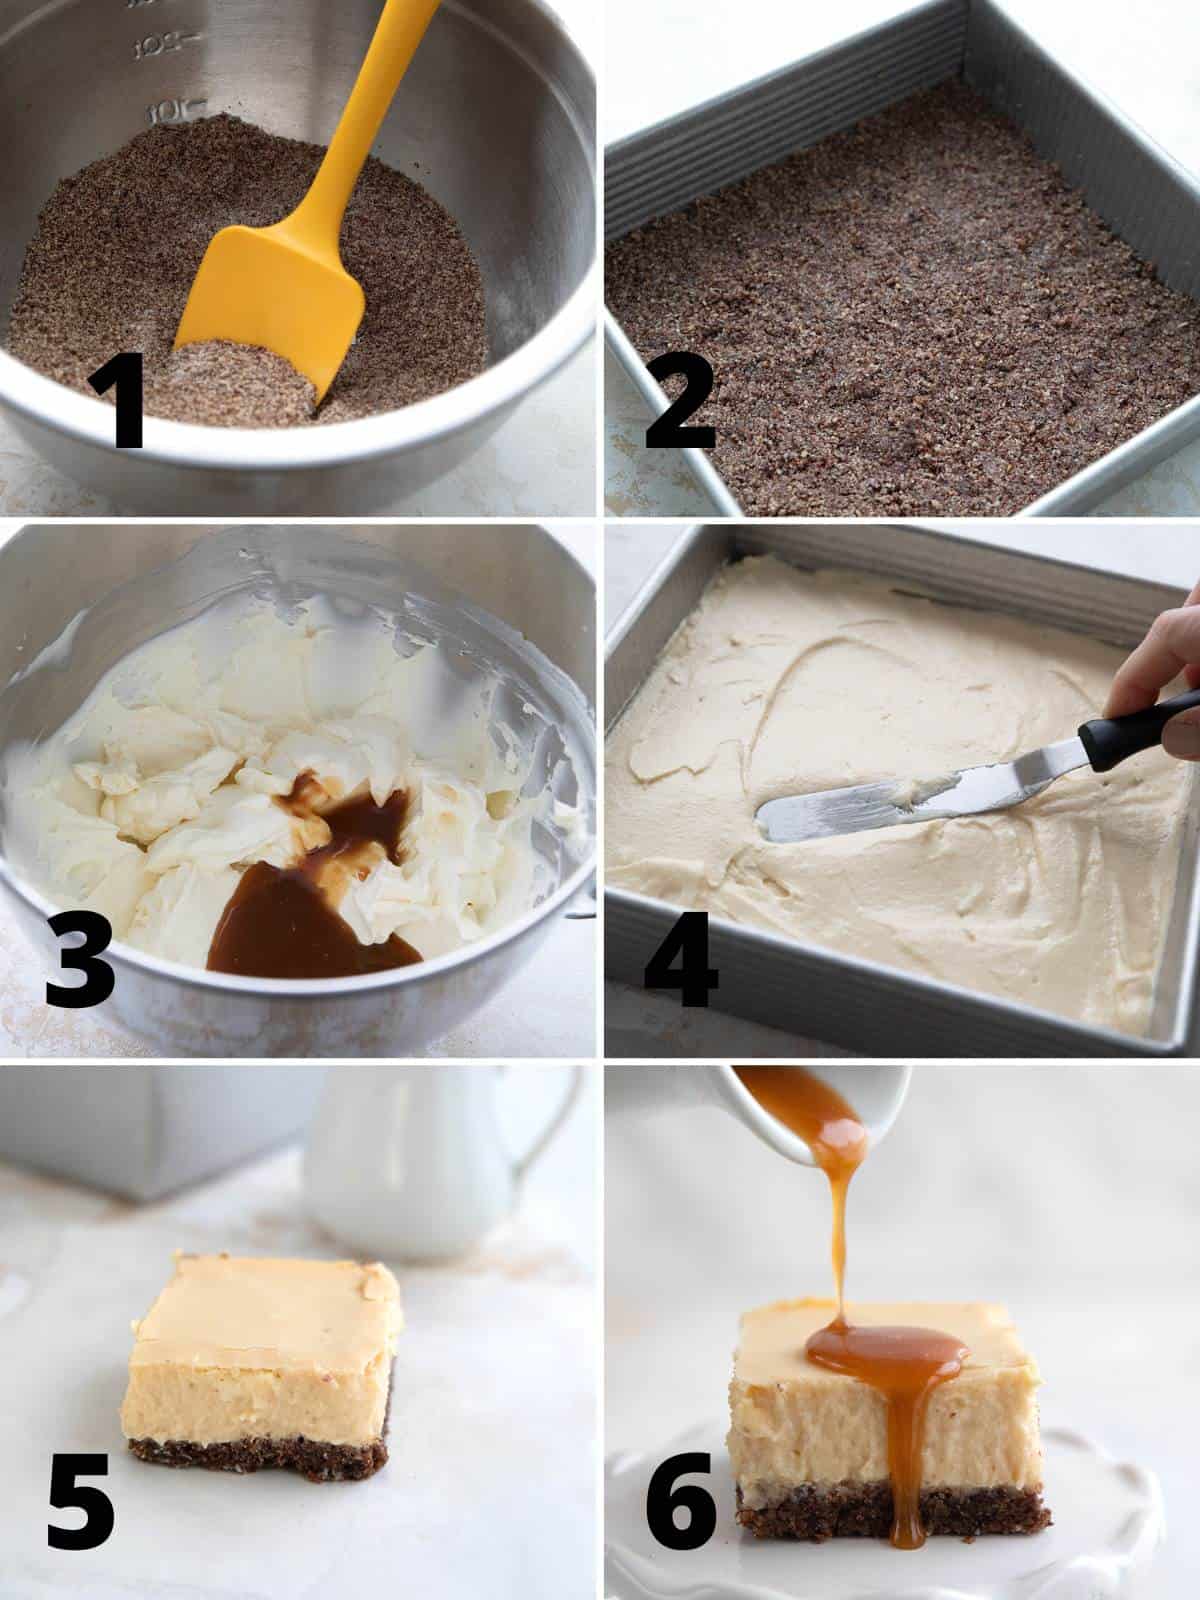 A collage of 6 images showing the steps for making Keto Salted Caramel Cheesecake Bars.